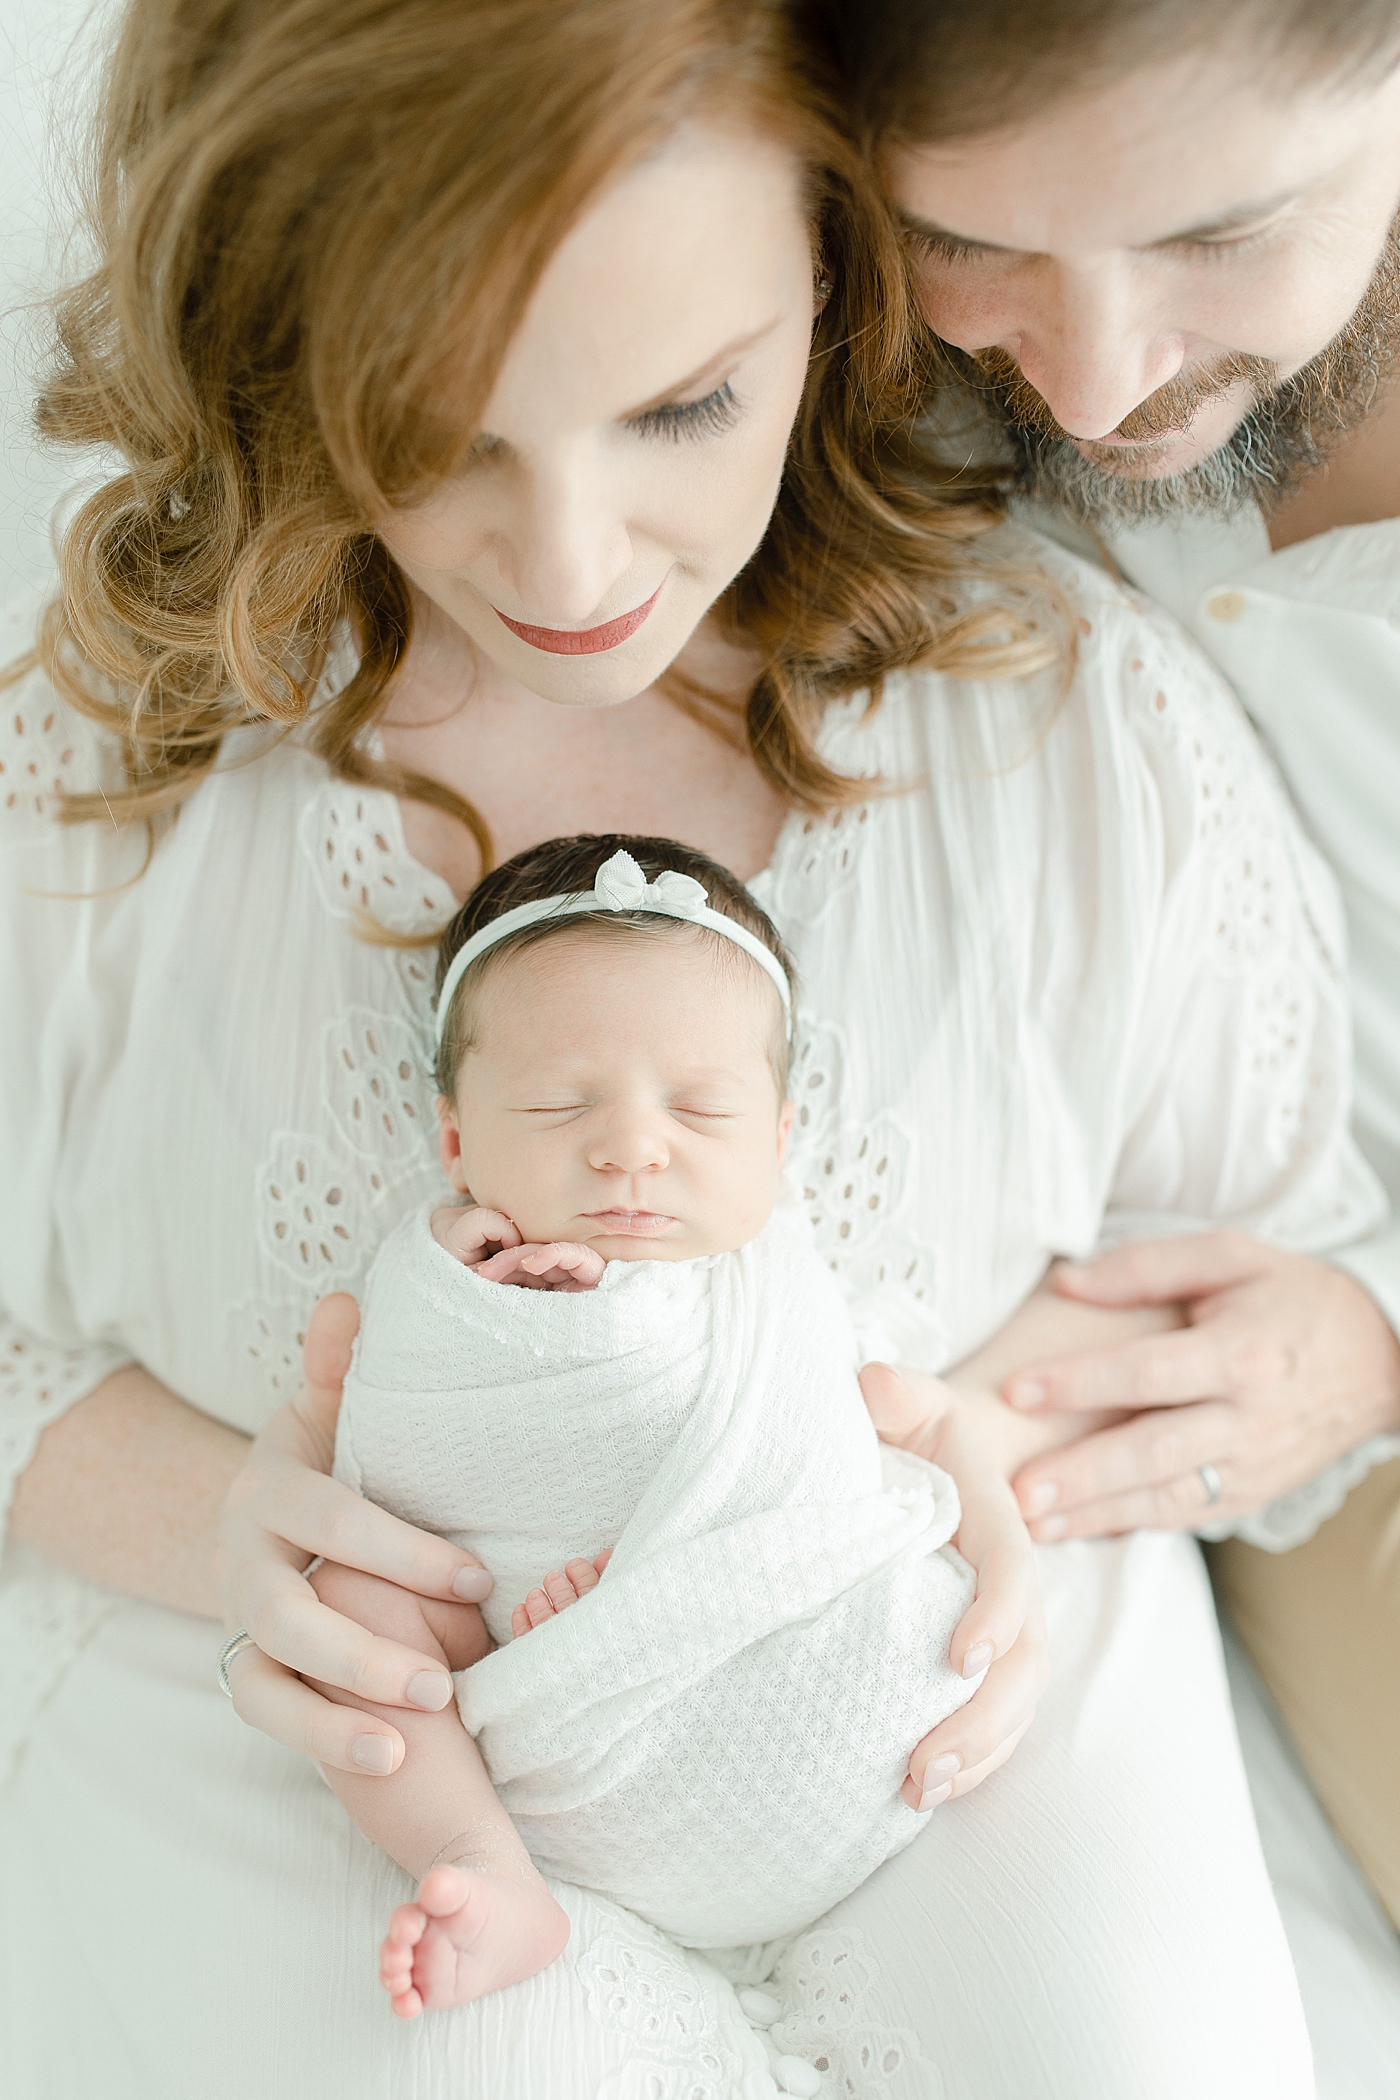 Sleeping newborn baby girl in white swaddle held by parents | Photo by Little Sunshine Photography 